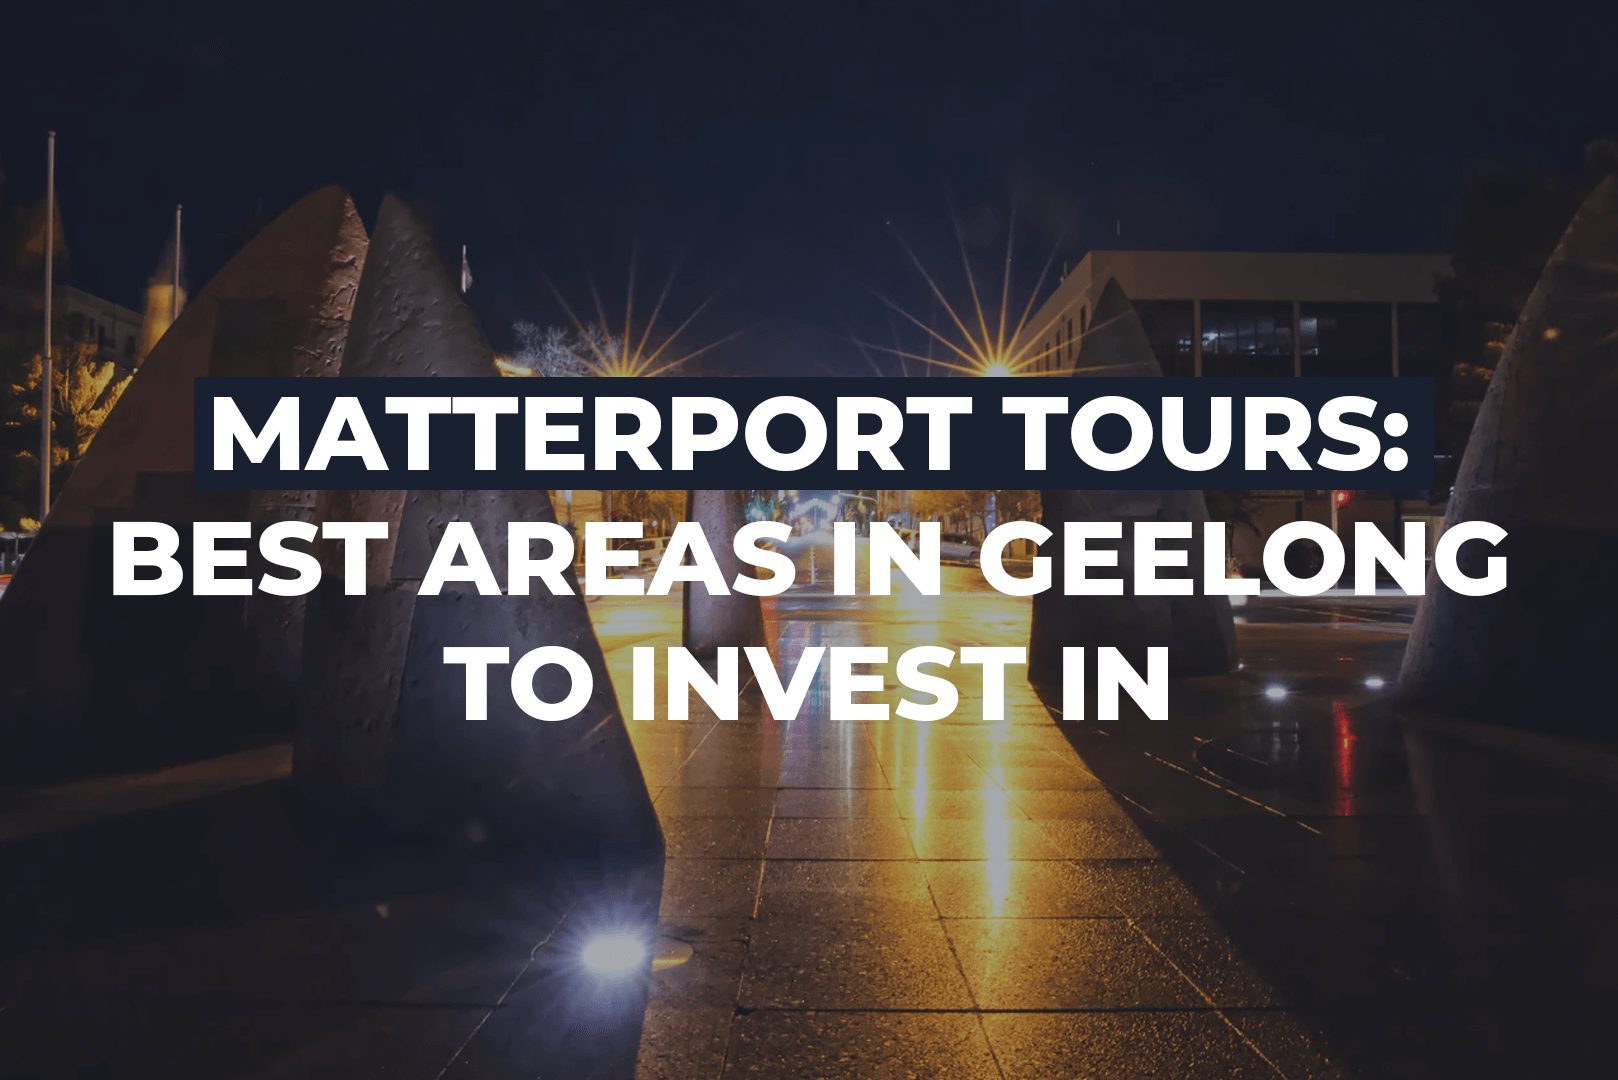 Matterport Tours: Best Areas In Geelong To Invest In